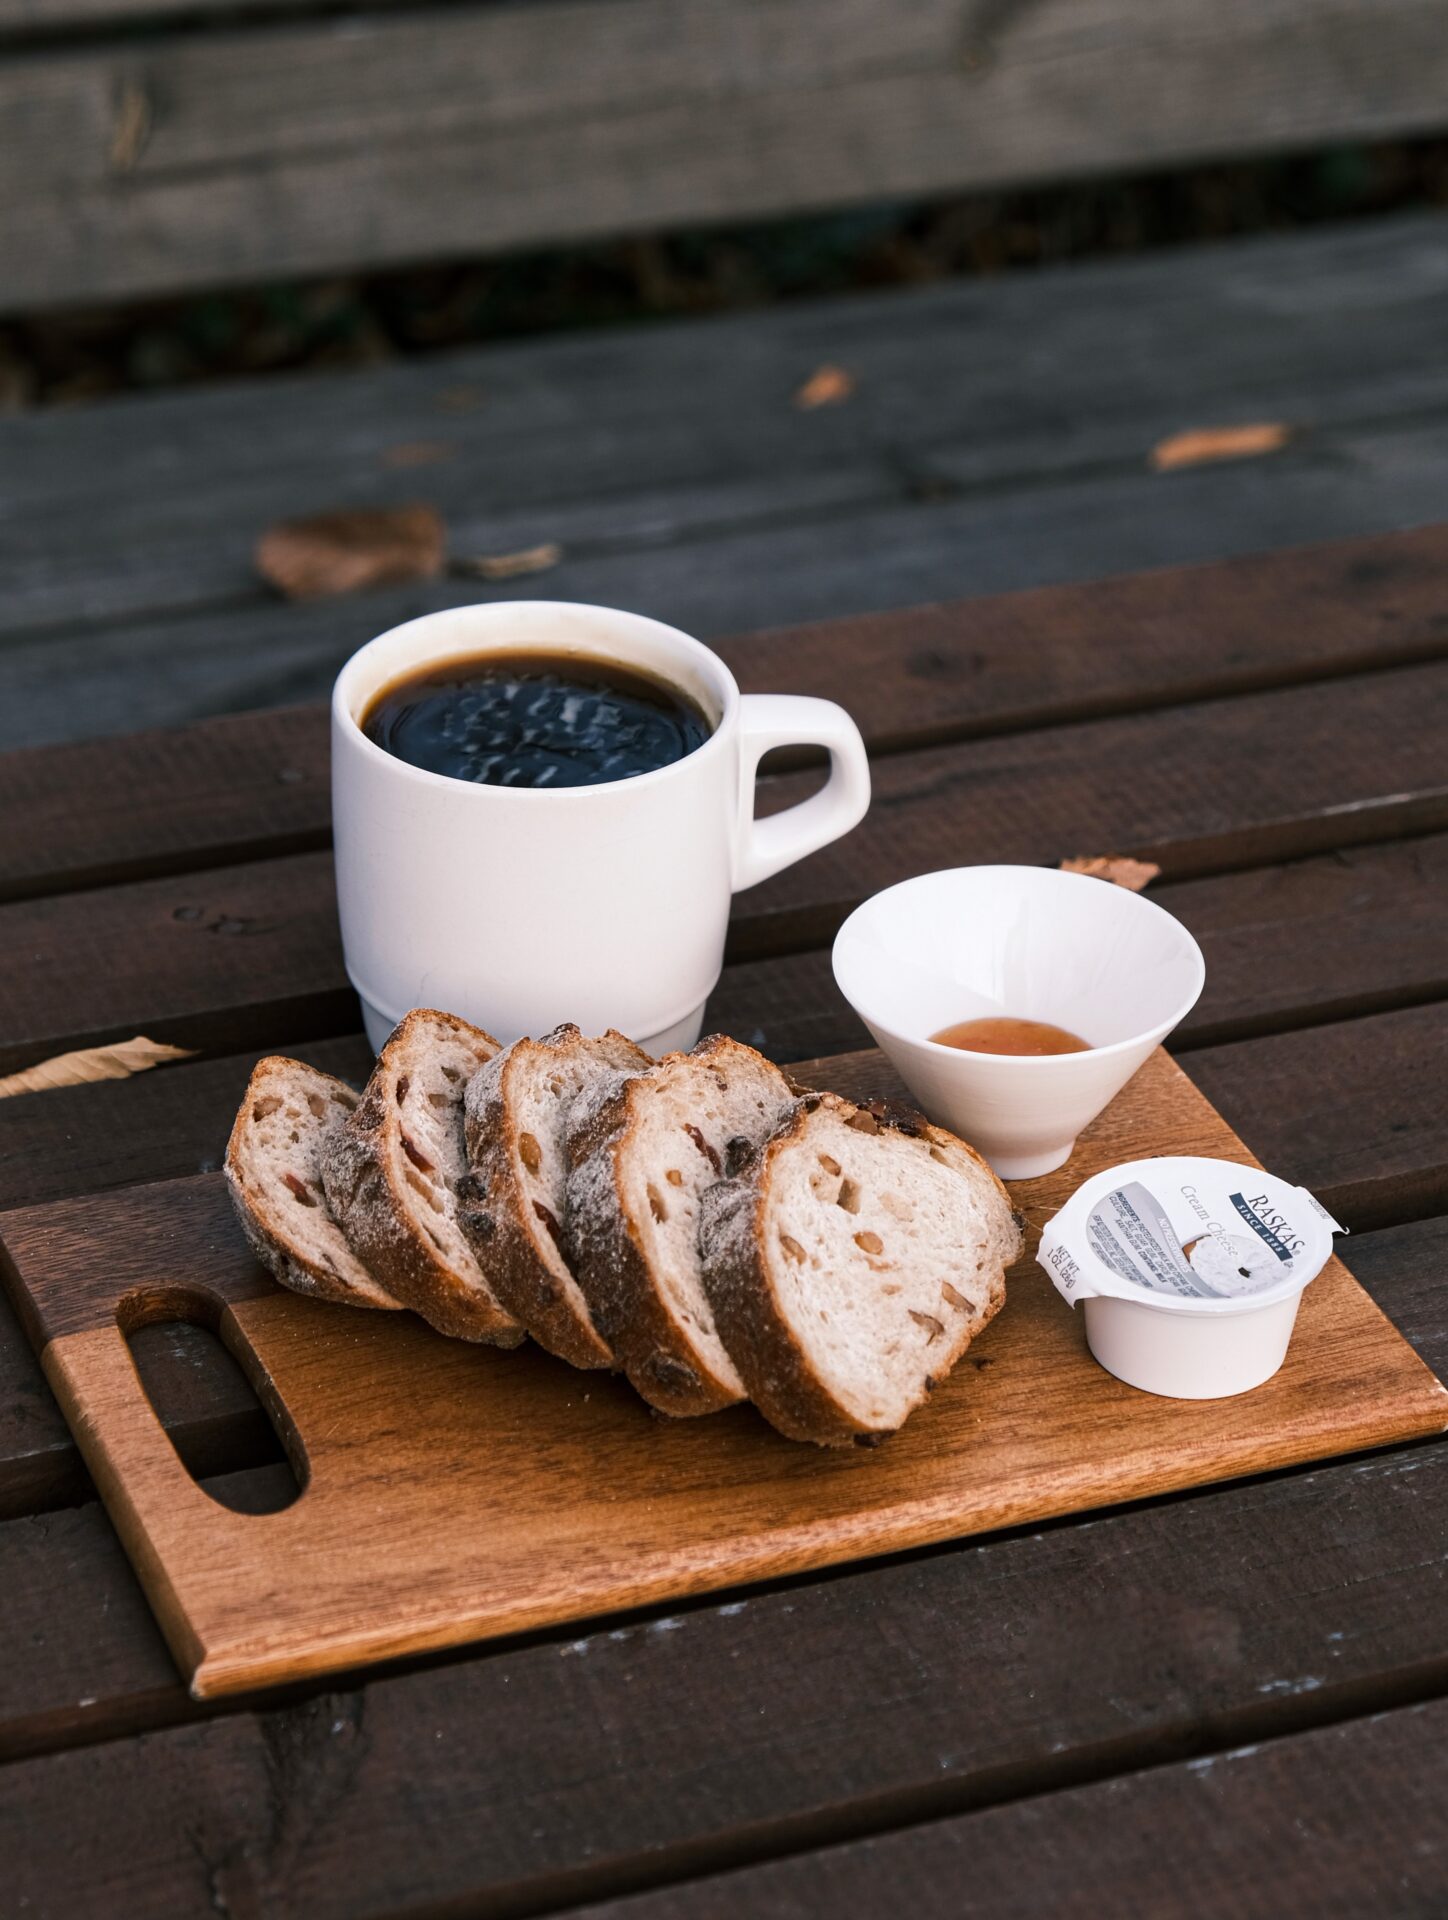 A cup of coffee, cream, and several slices of bread are displayed on a wooden serving tray